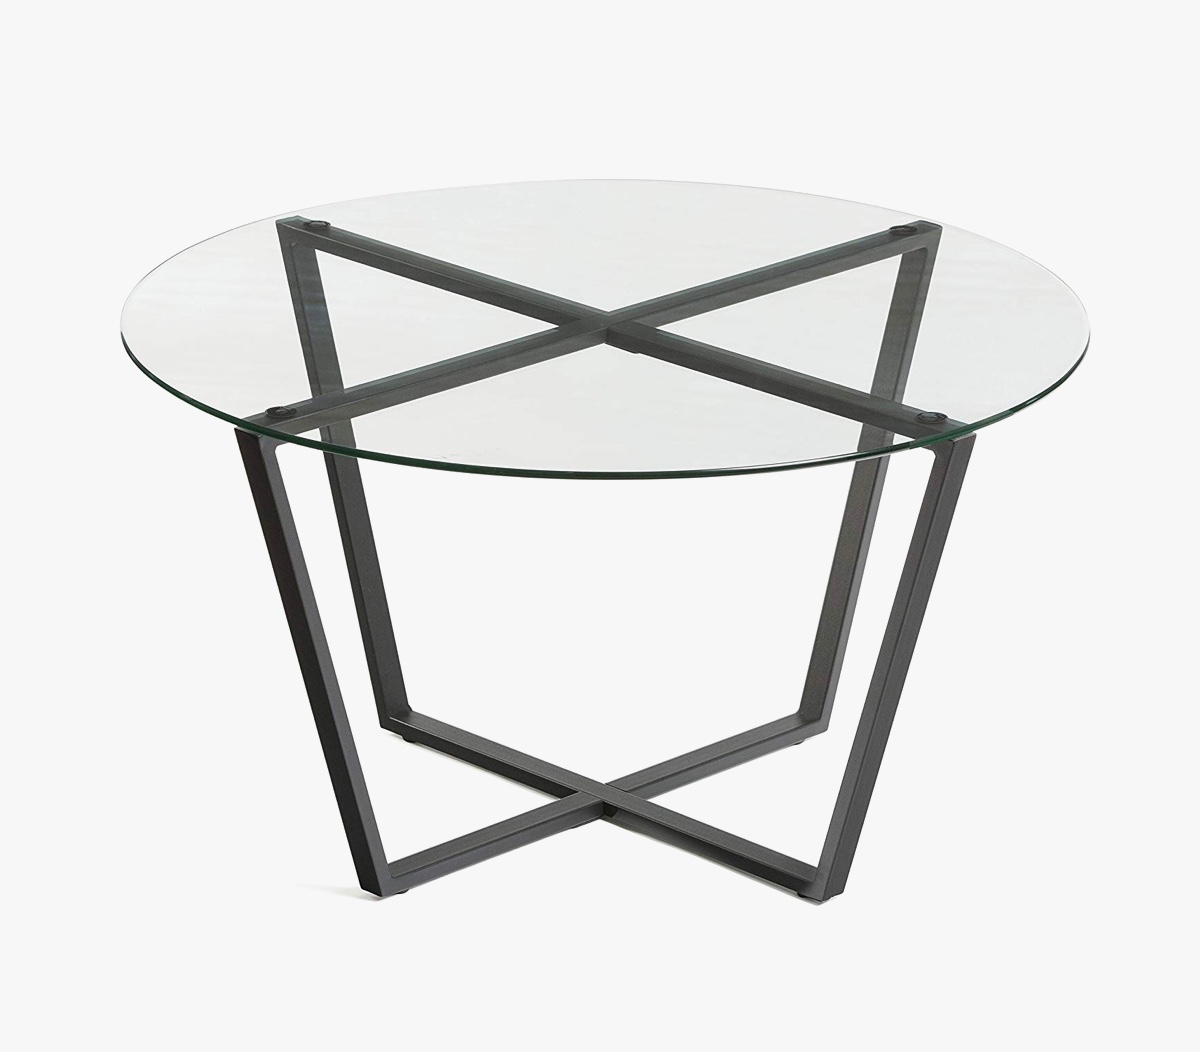 Modern Round Glass Coffee Table With Steel Base Under 100 Interior